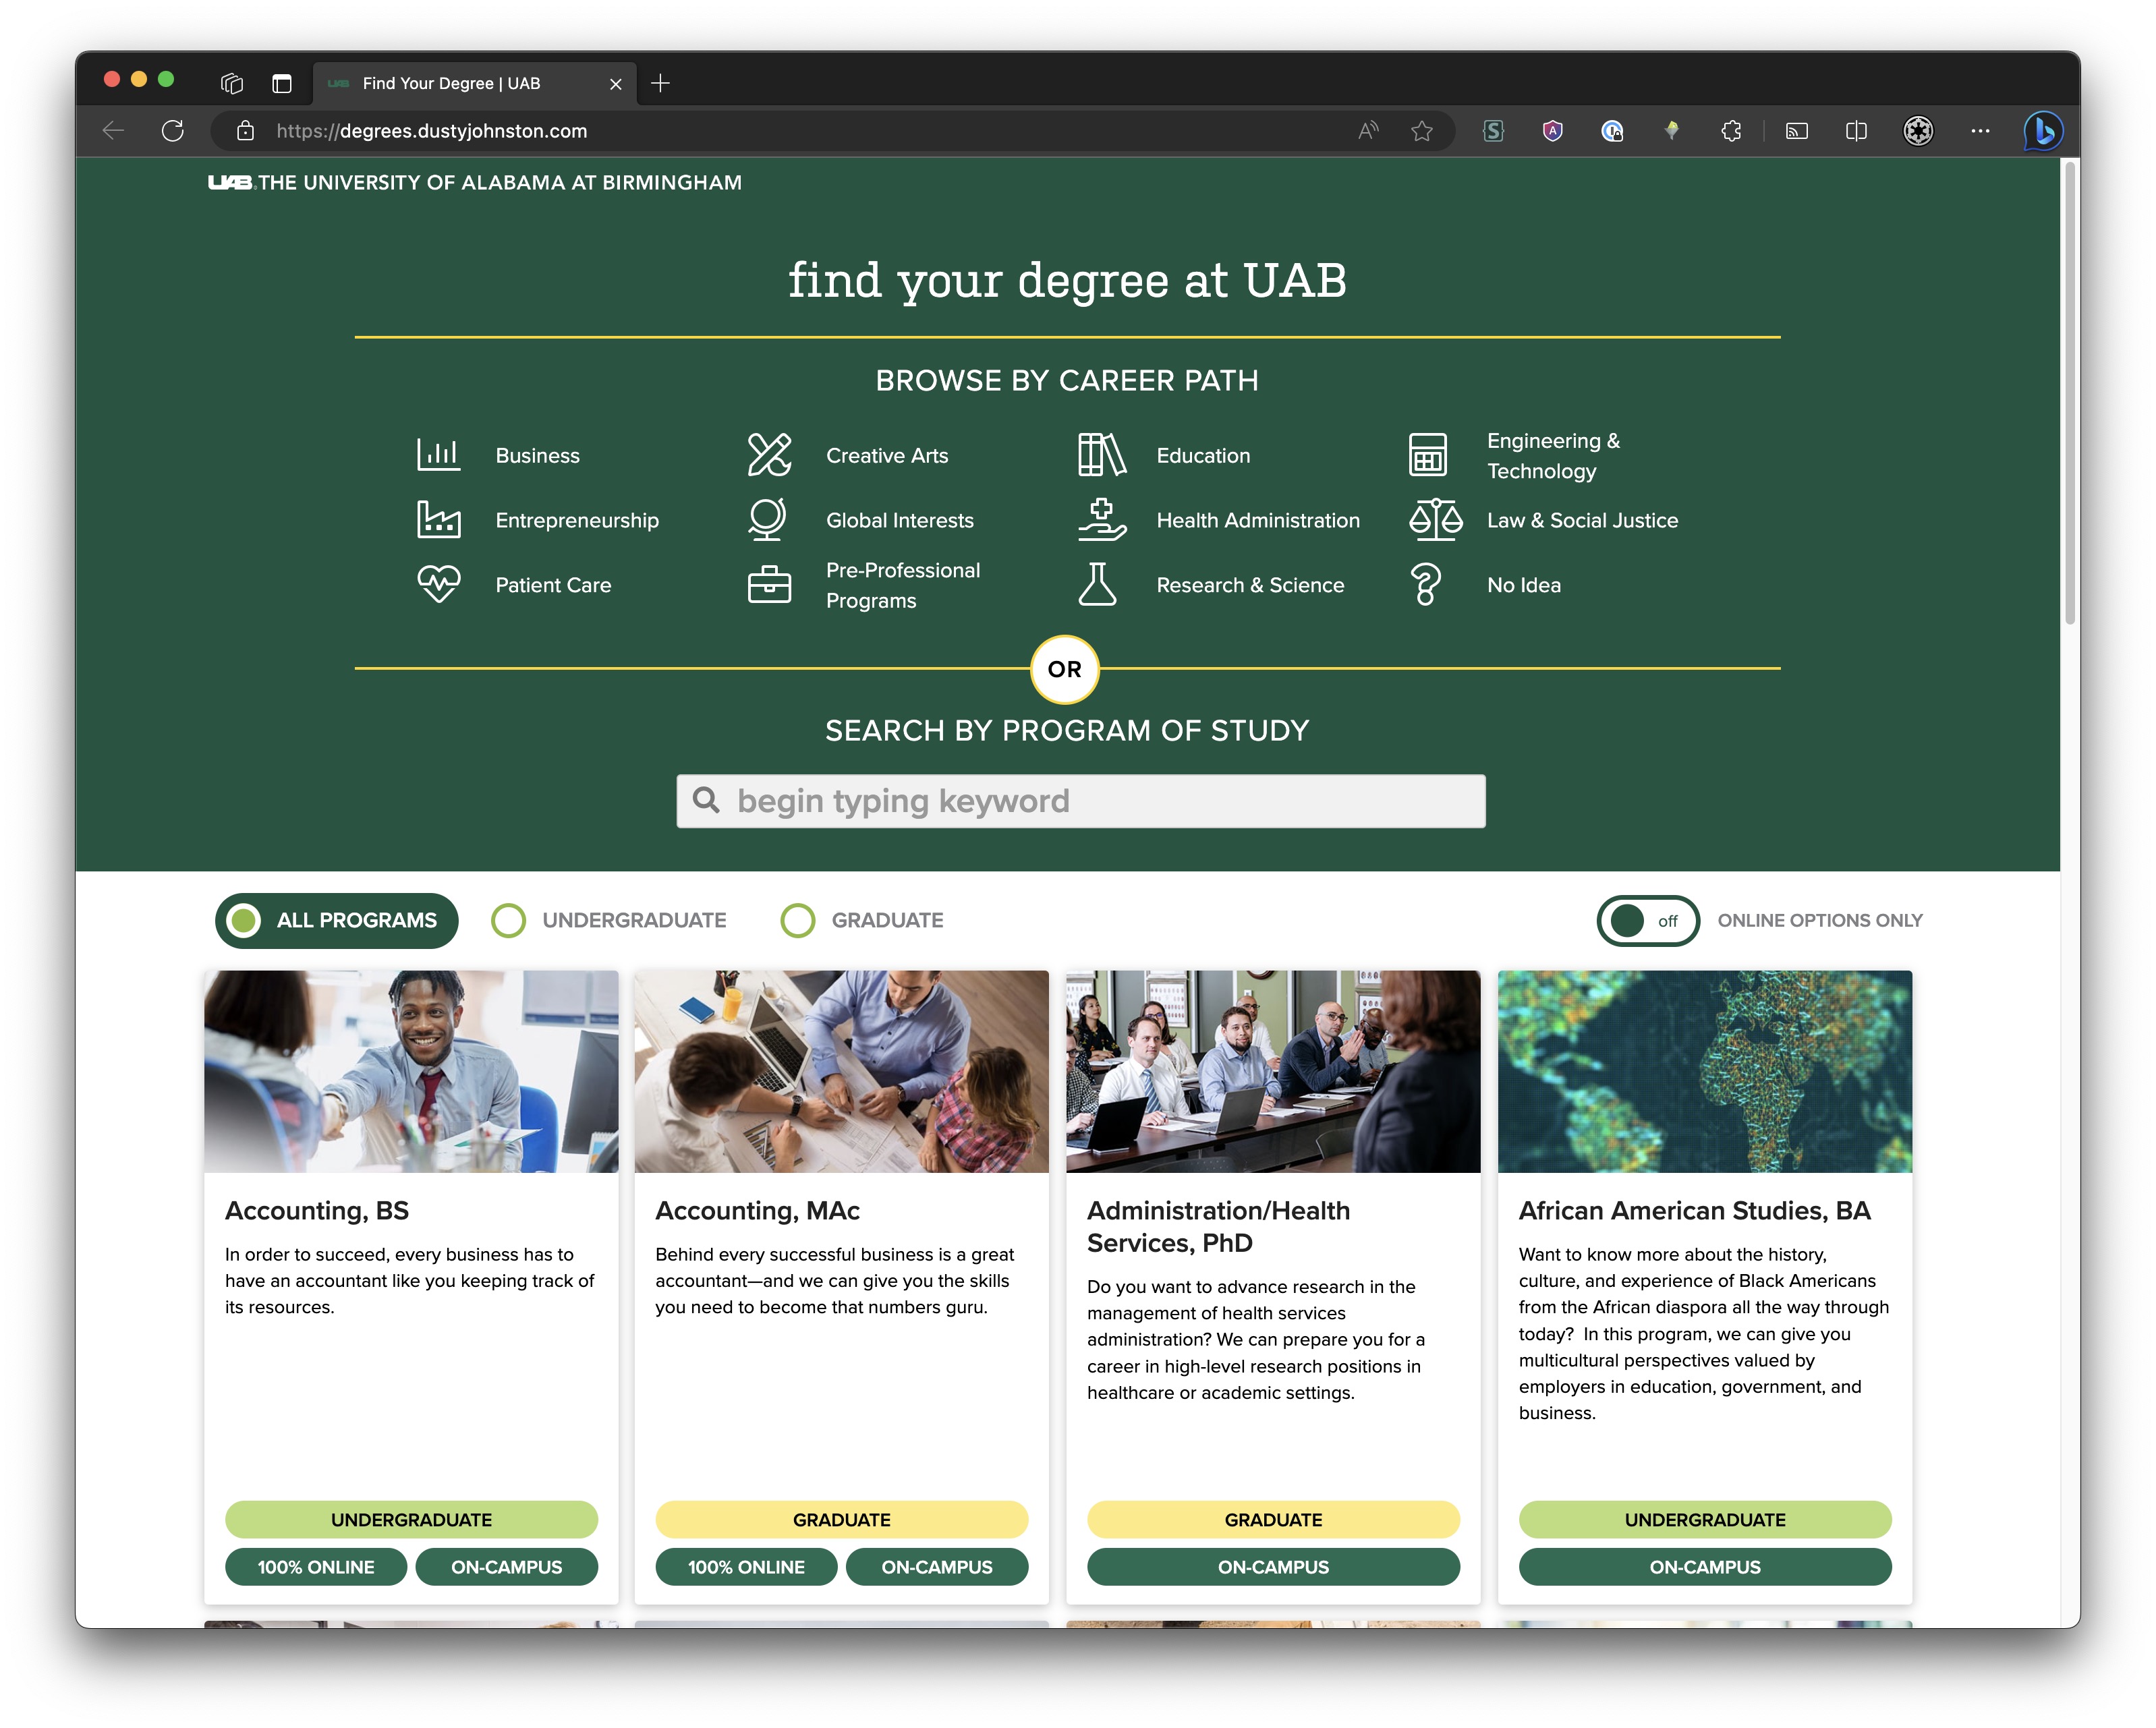 screen capture of the Degrees website